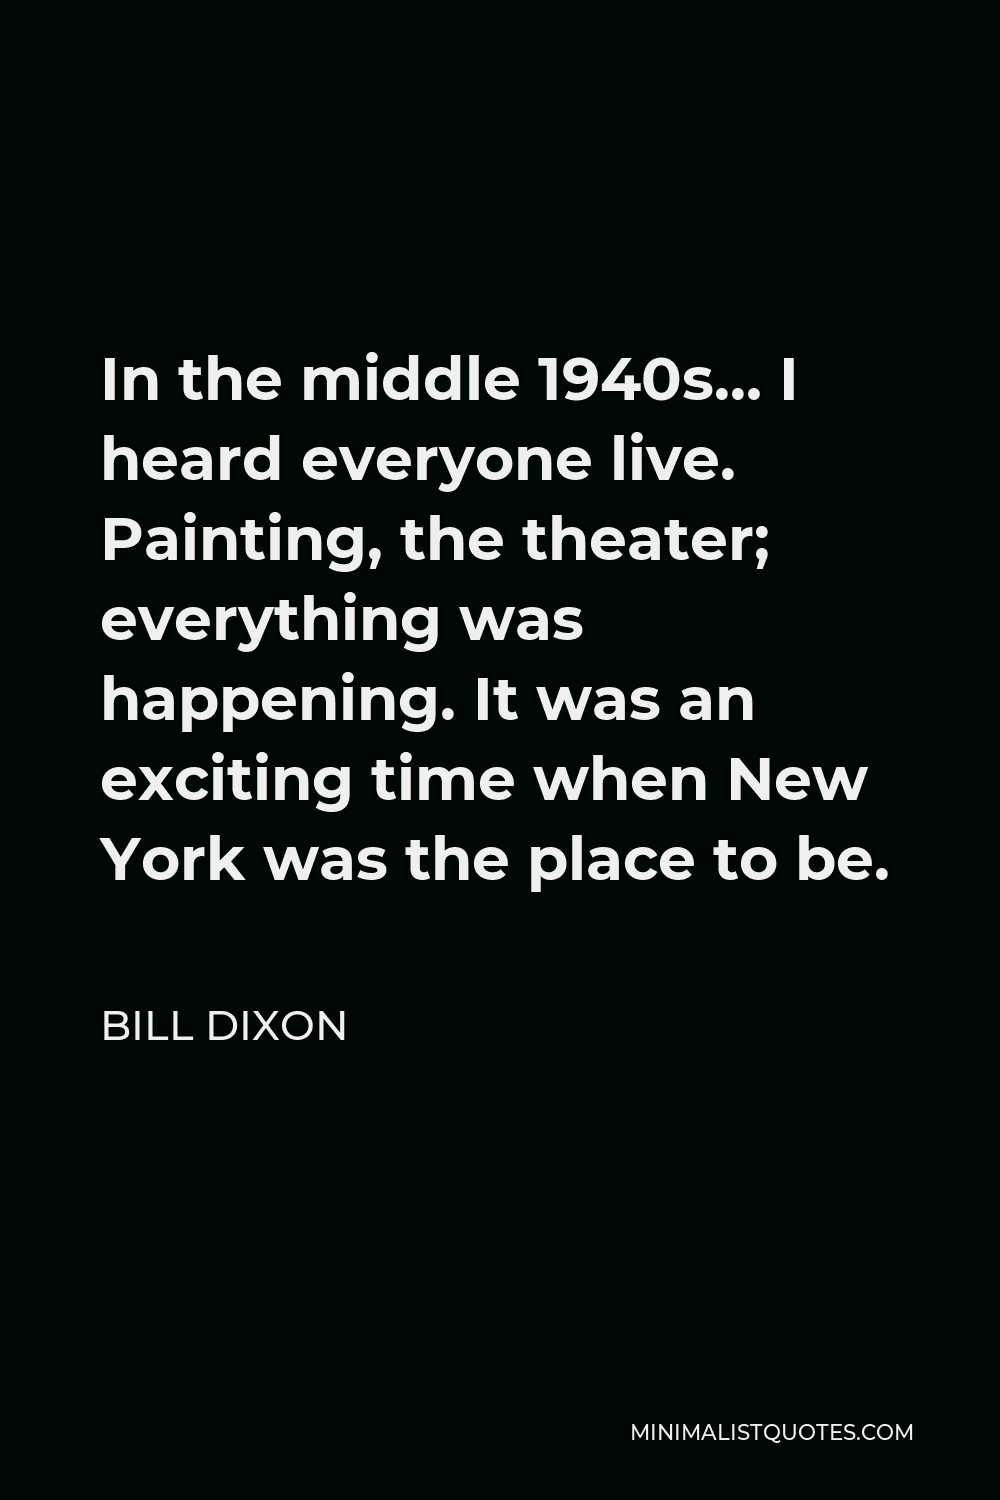 Bill Dixon Quote - In the middle 1940s… I heard everyone live. Painting, the theater; everything was happening. It was an exciting time when New York was the place to be.